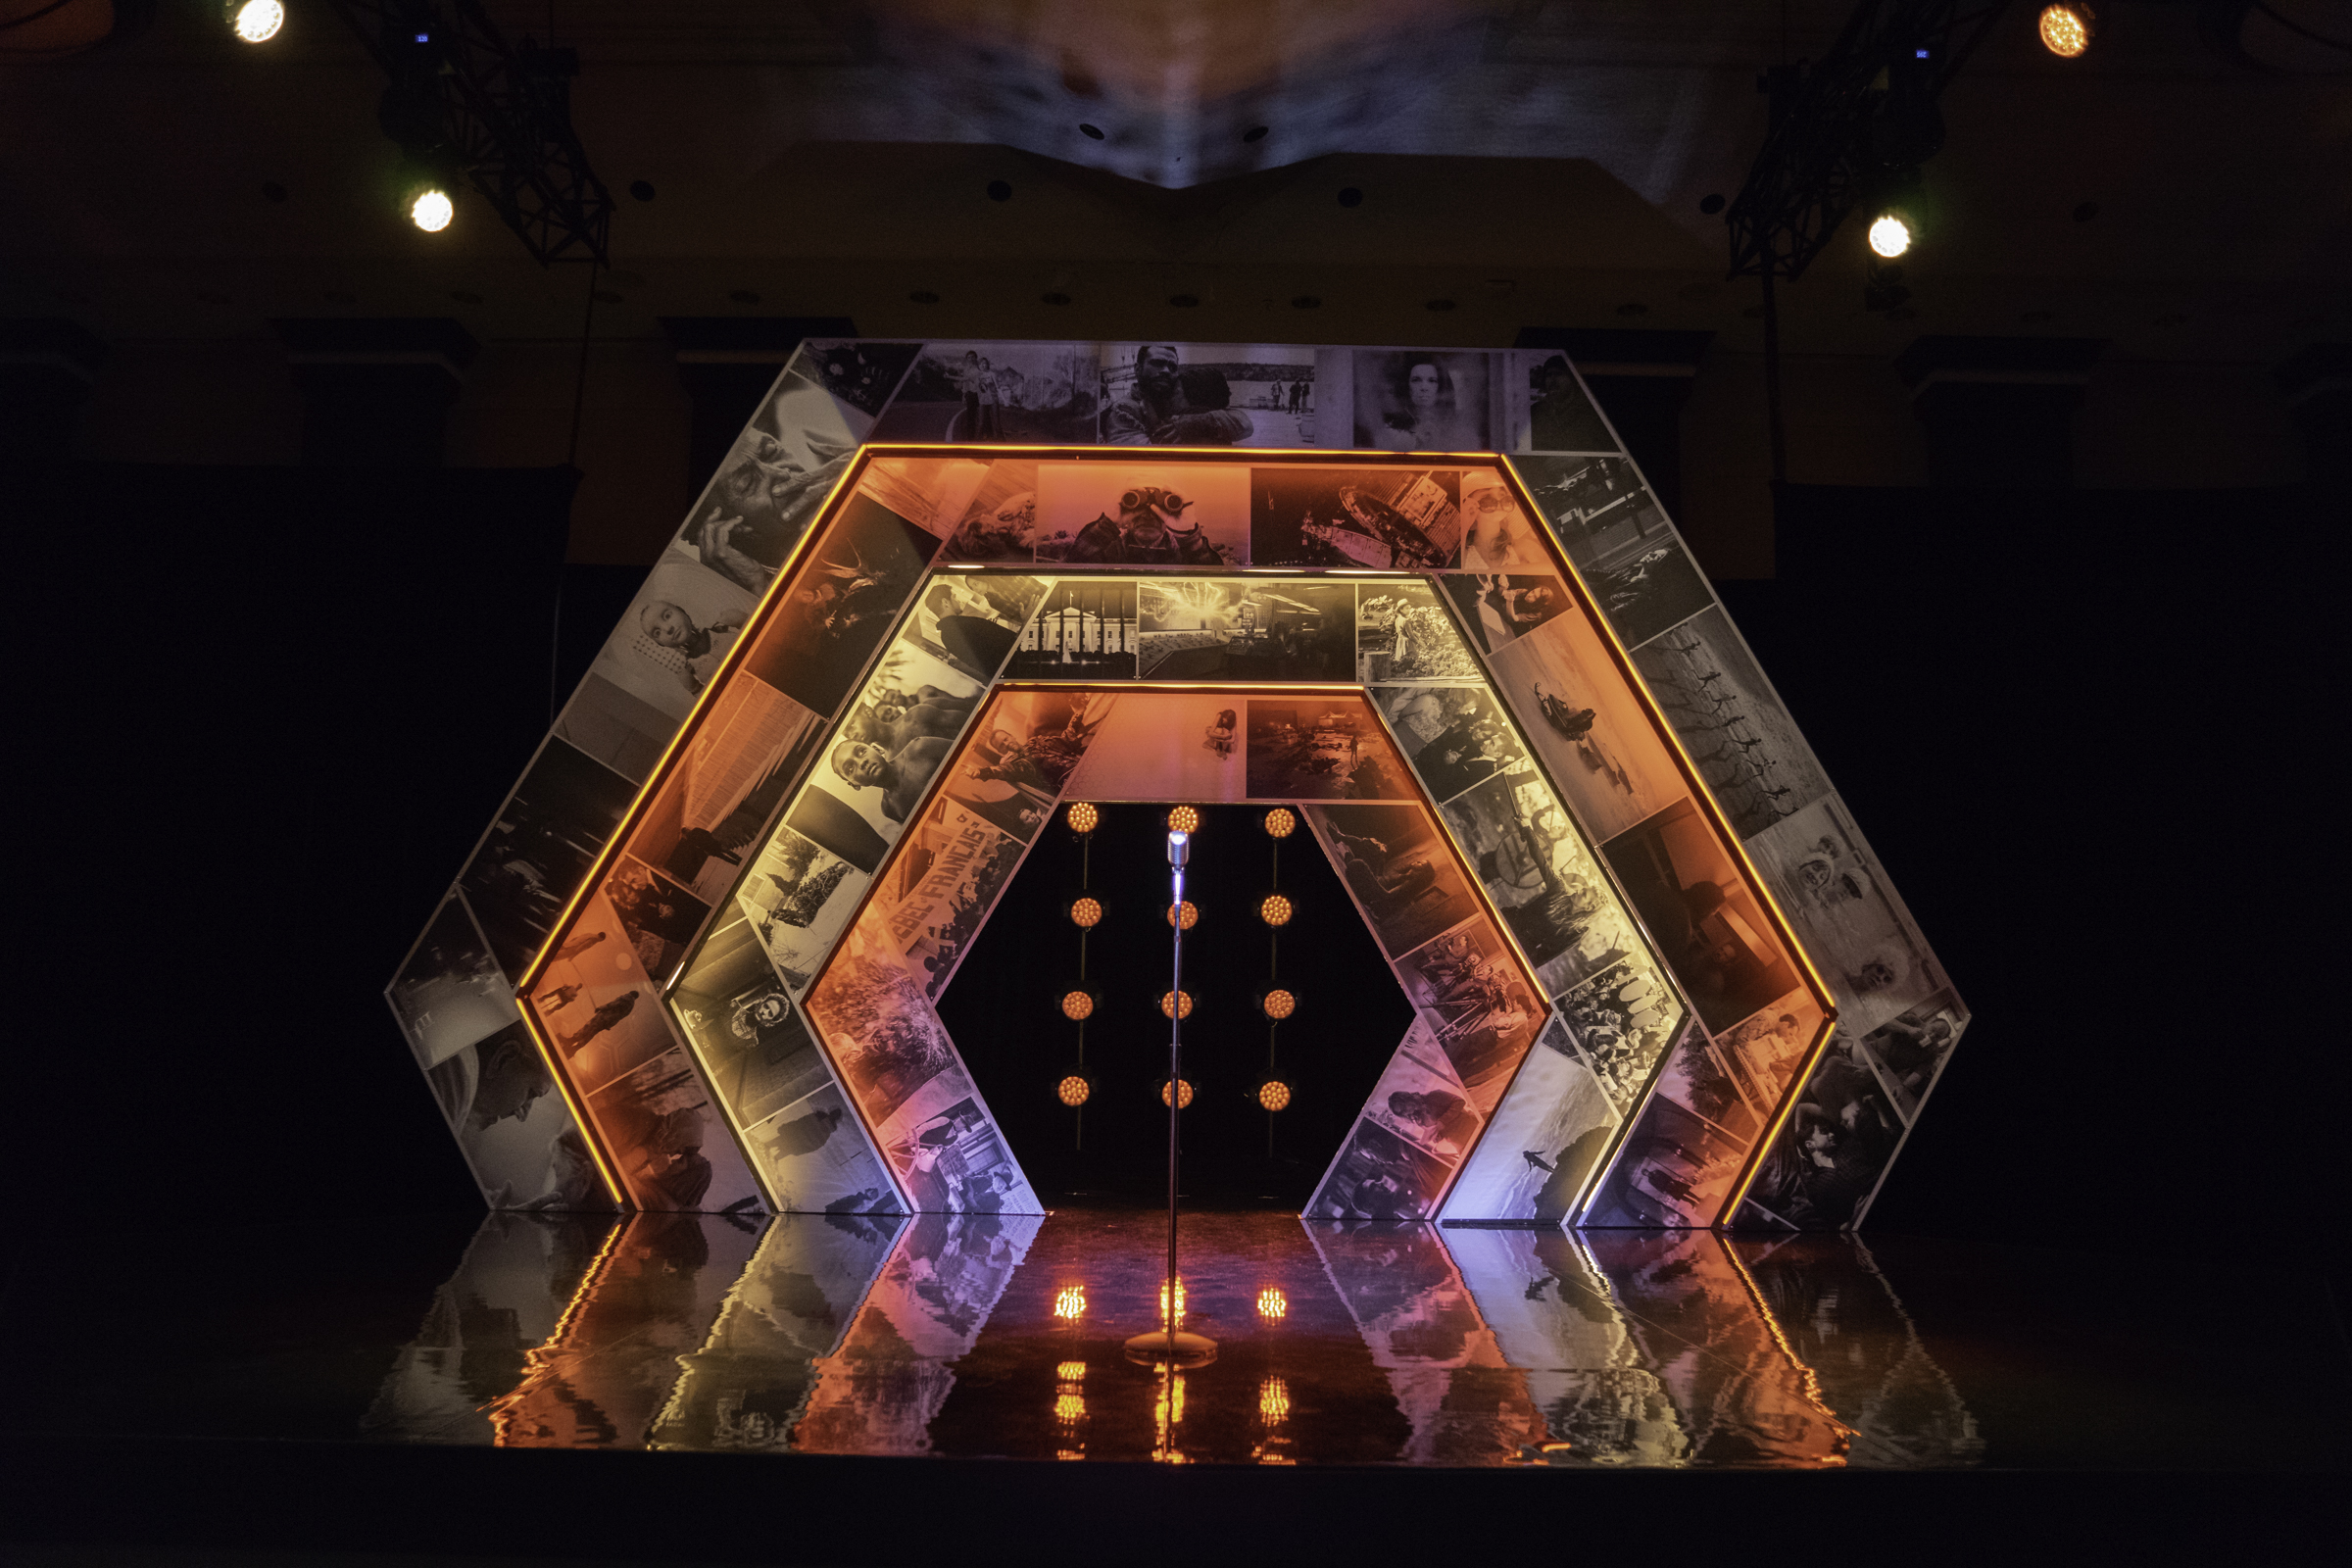   DGC Awards 2018.  Scenic Design: Michelle Tracey with Triga Creative. Lighting Design: Shannon Lea Doyle. Creative Director: Charles Officer. Photo by: Lyon Smith 